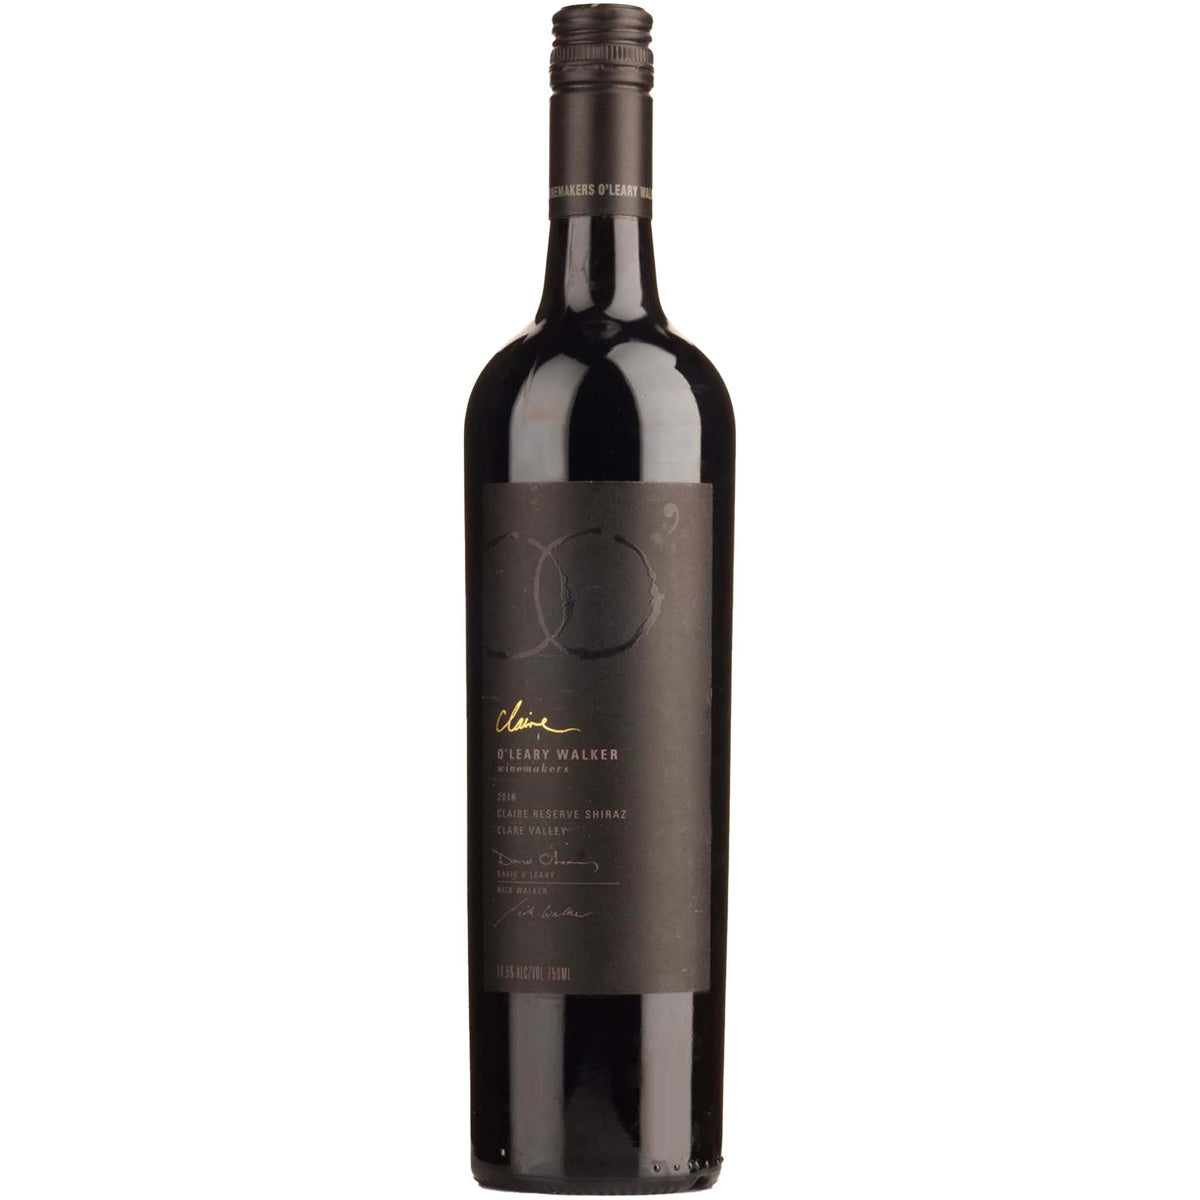 O'Leary Walker Claire Reserve Shiraz 2013